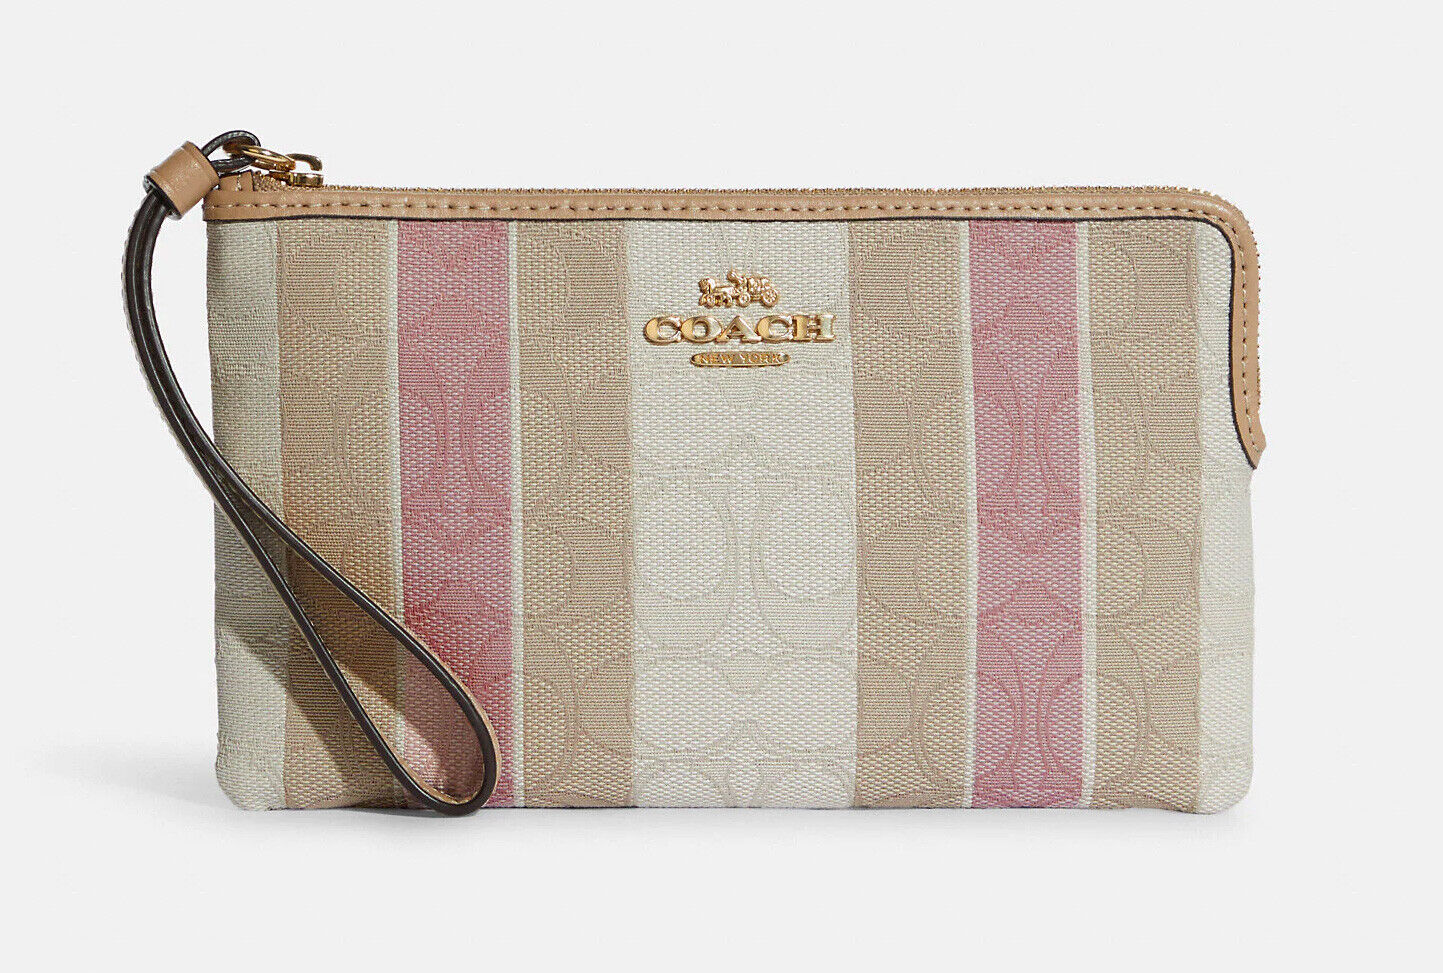 NWT Coach Large Corner Zip Wristlet In Signature Jacquard With Stripes